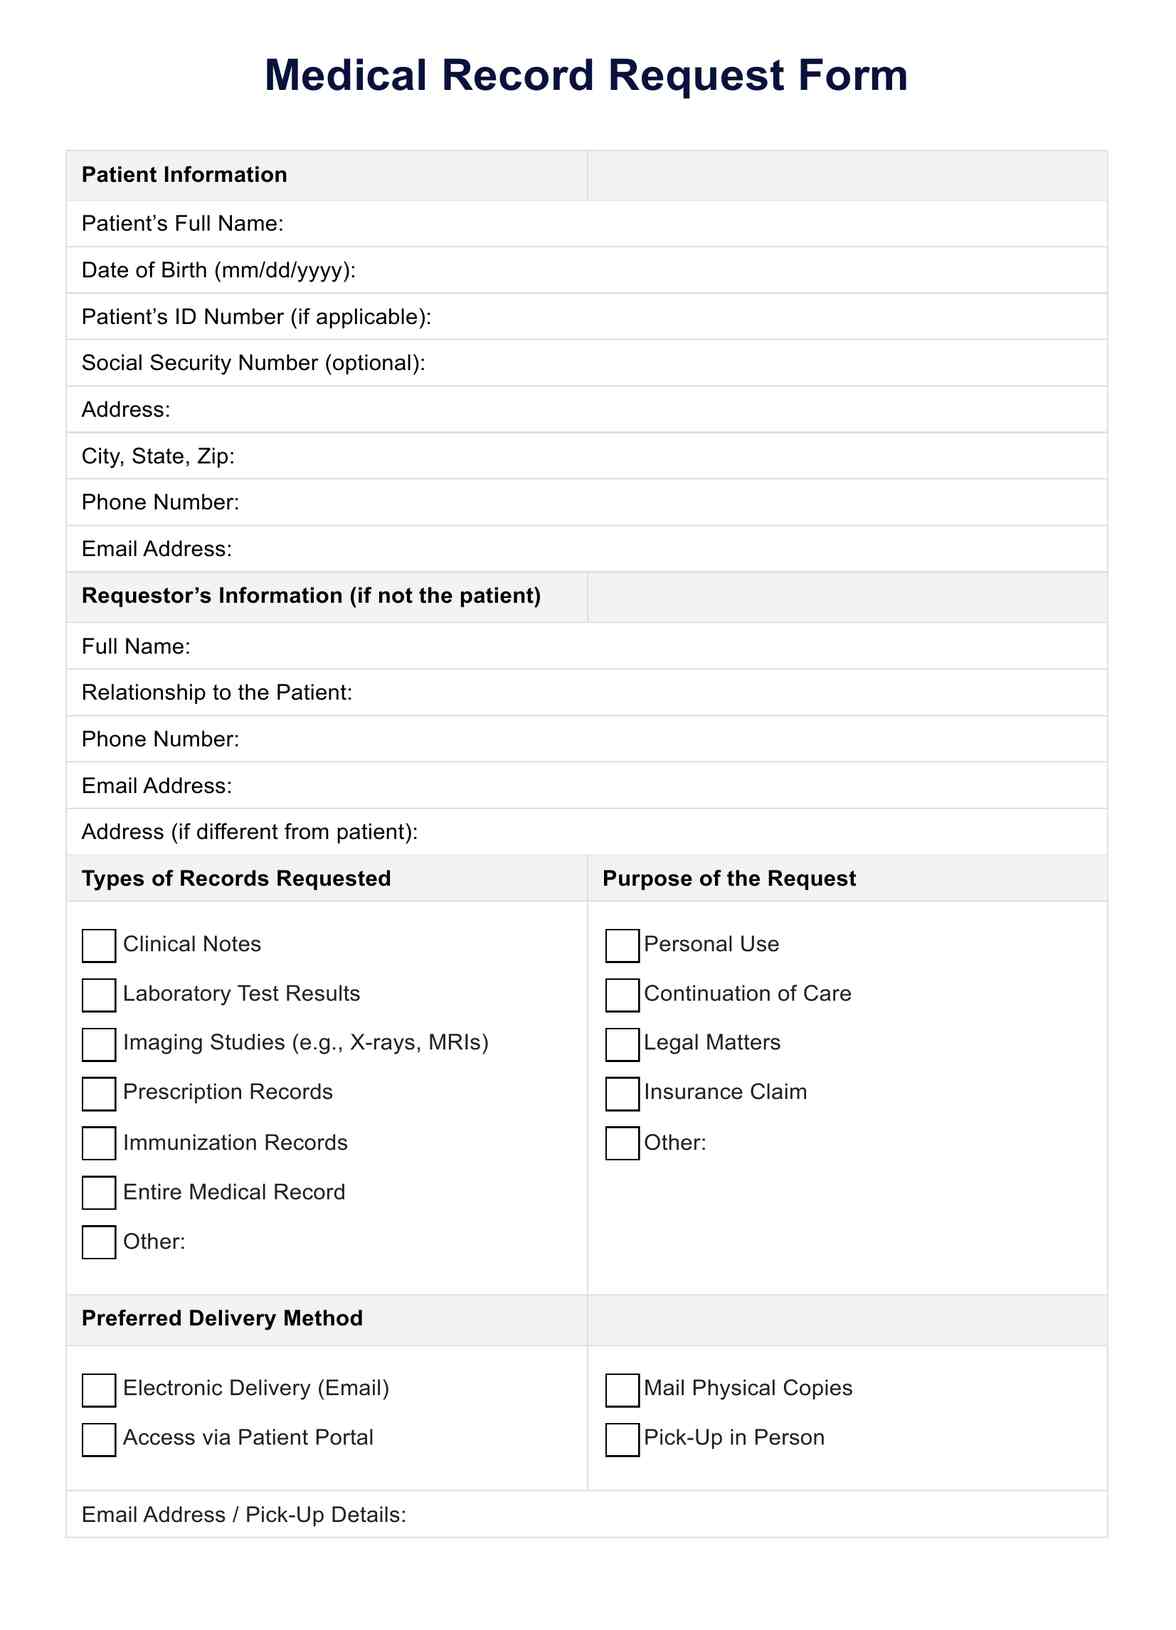 Medical Record Request Form Template PDF Example